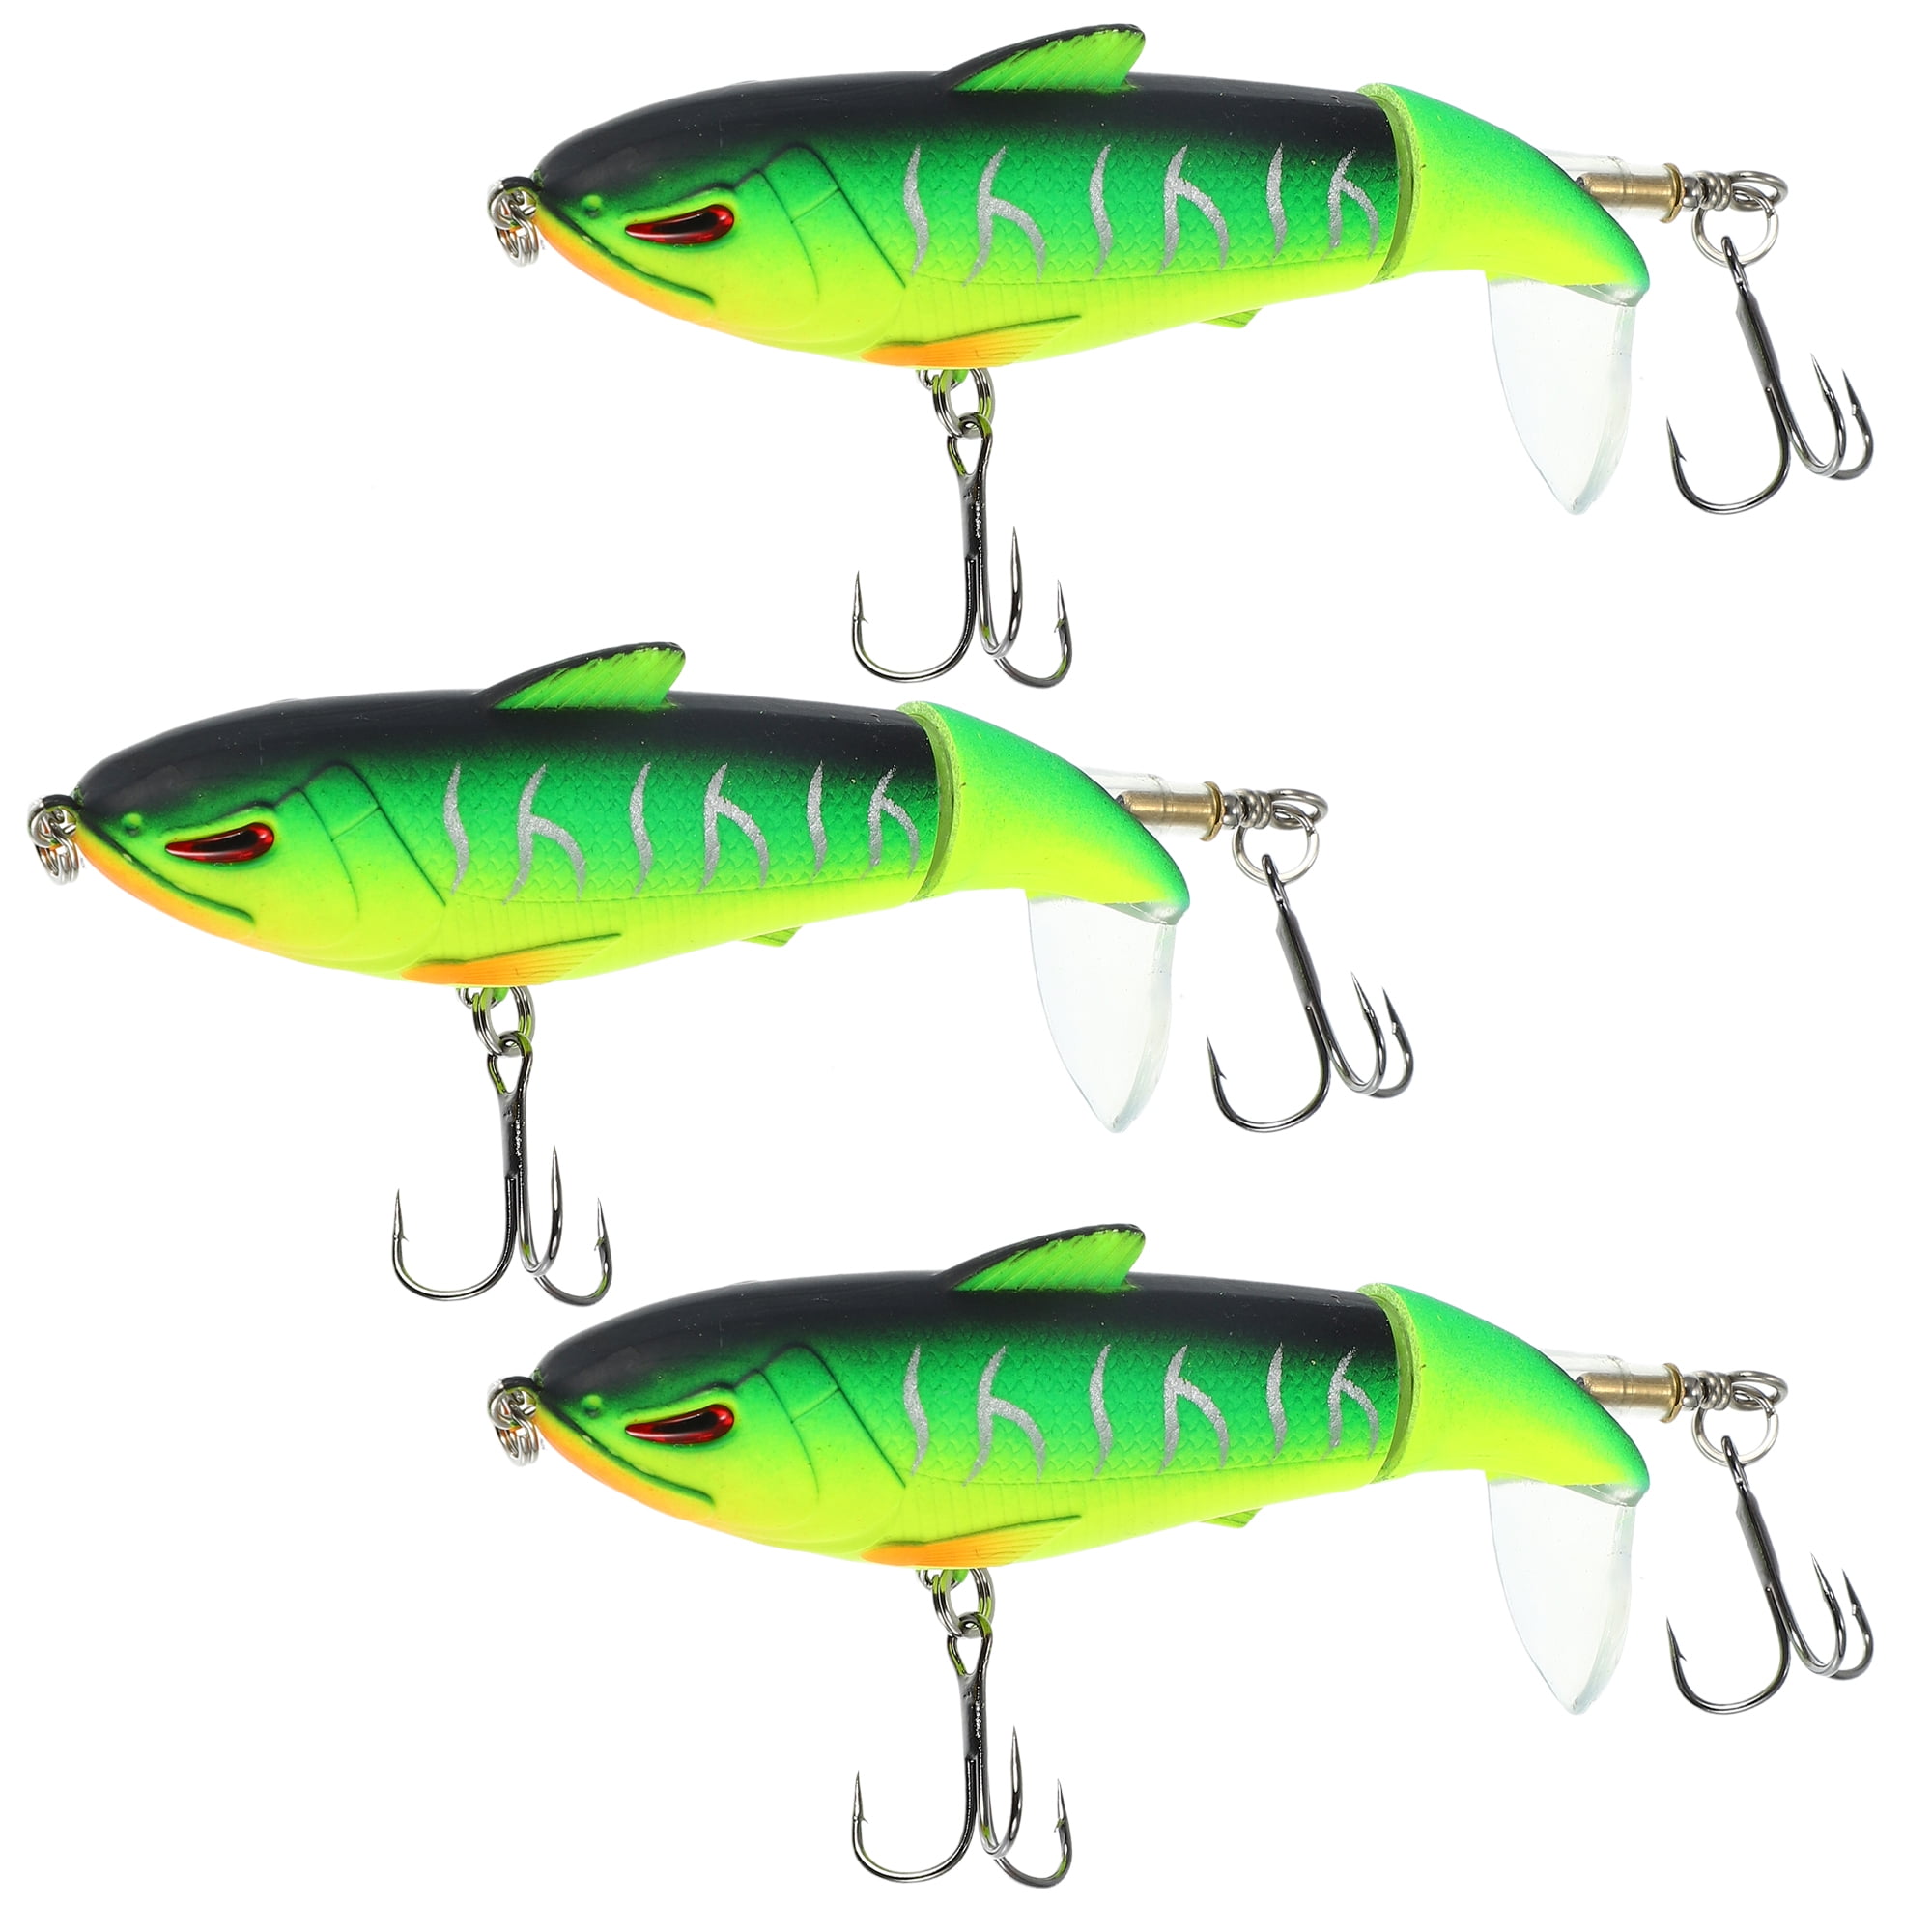 Unique Bargains 3 Pcs Fishing Lures Jerk Baits for Bass Fishing Lifelike  Freshwater Lures ABS Green Yellow Black 0.04lb 